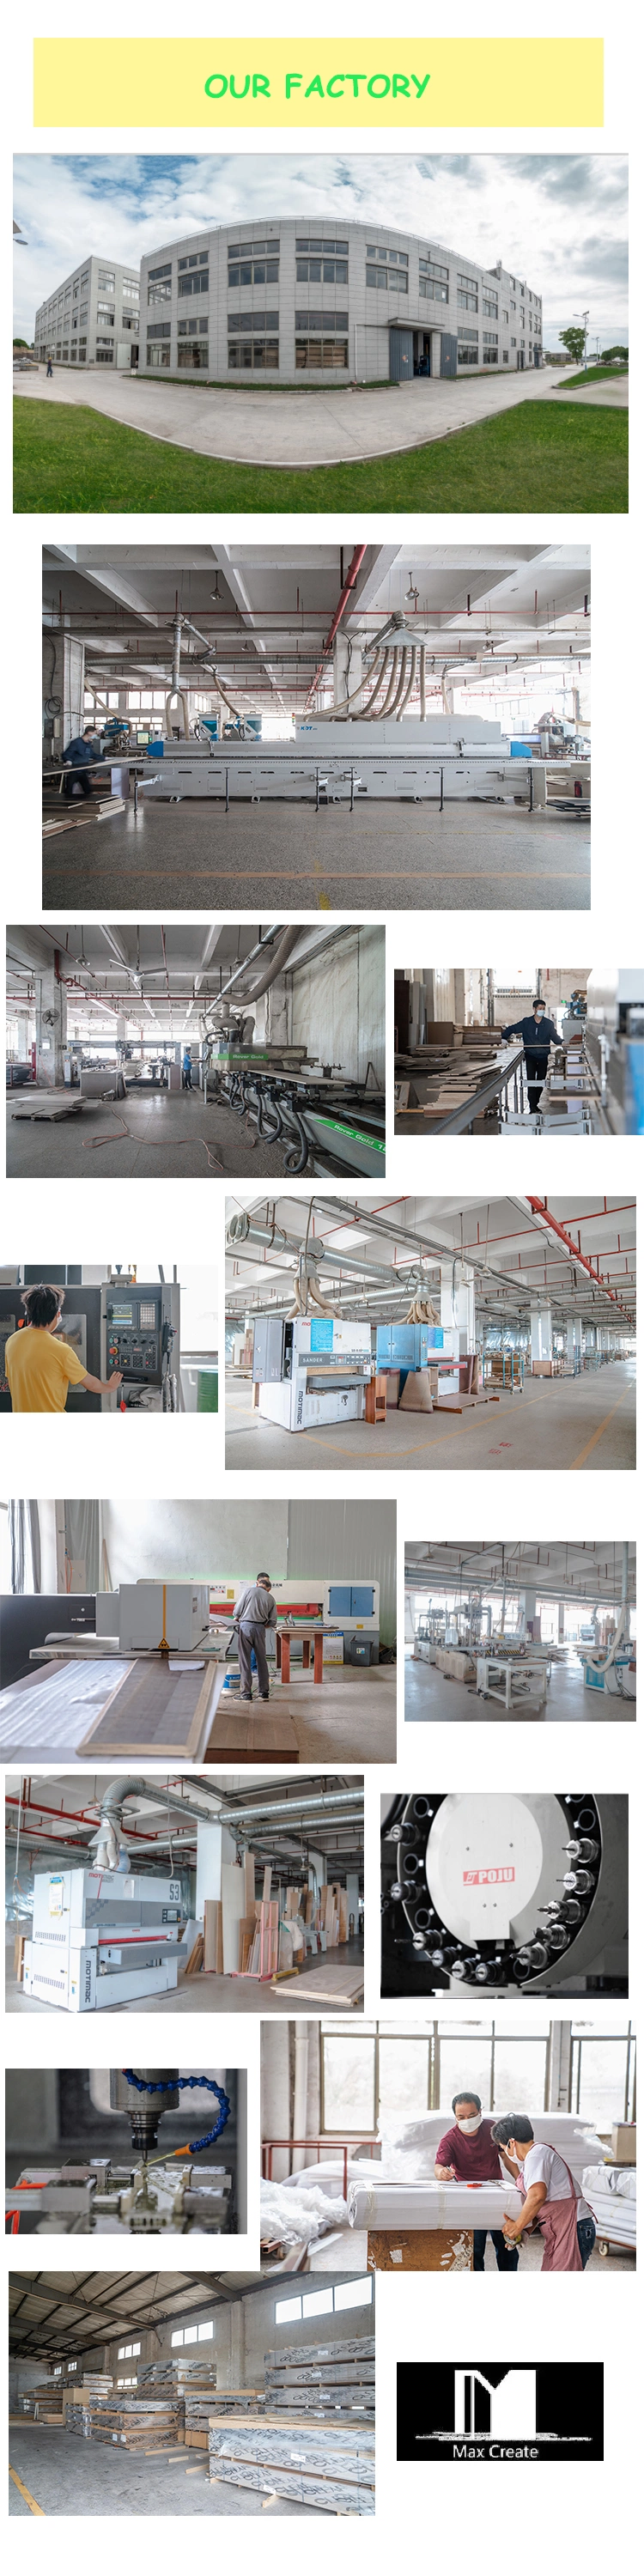 Fiberglass Imported Acrylic Modern Commercial Melamine Kitchen Cabinet From China